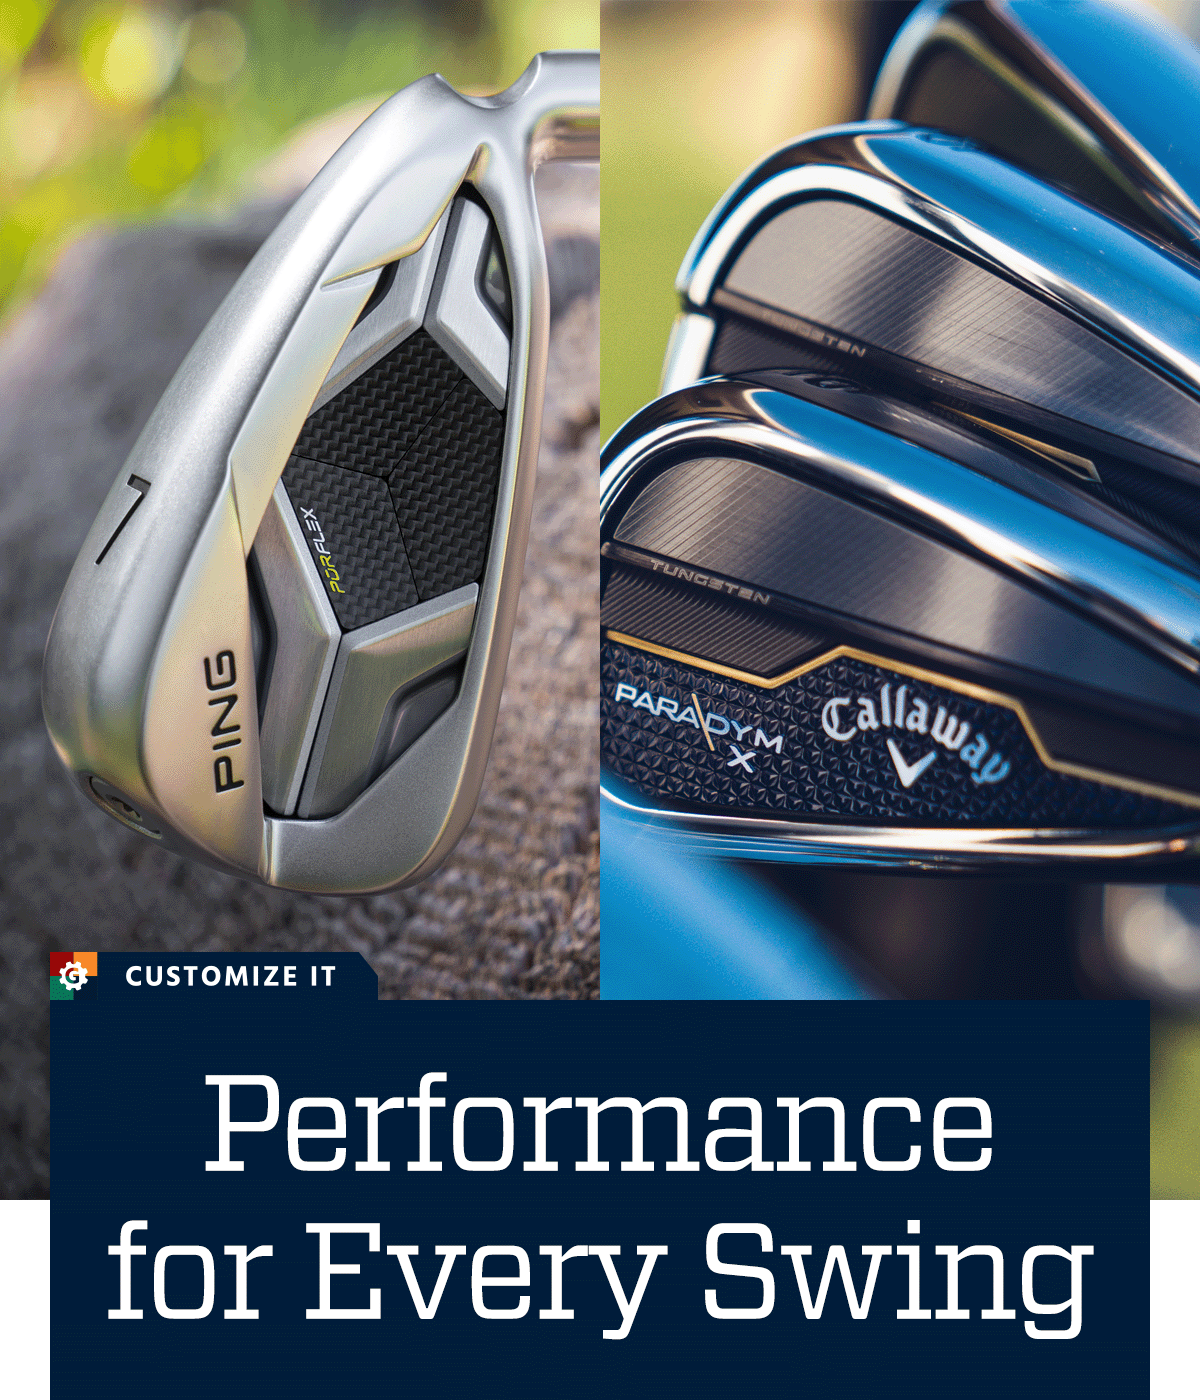 Performance for every swing. Customize it.